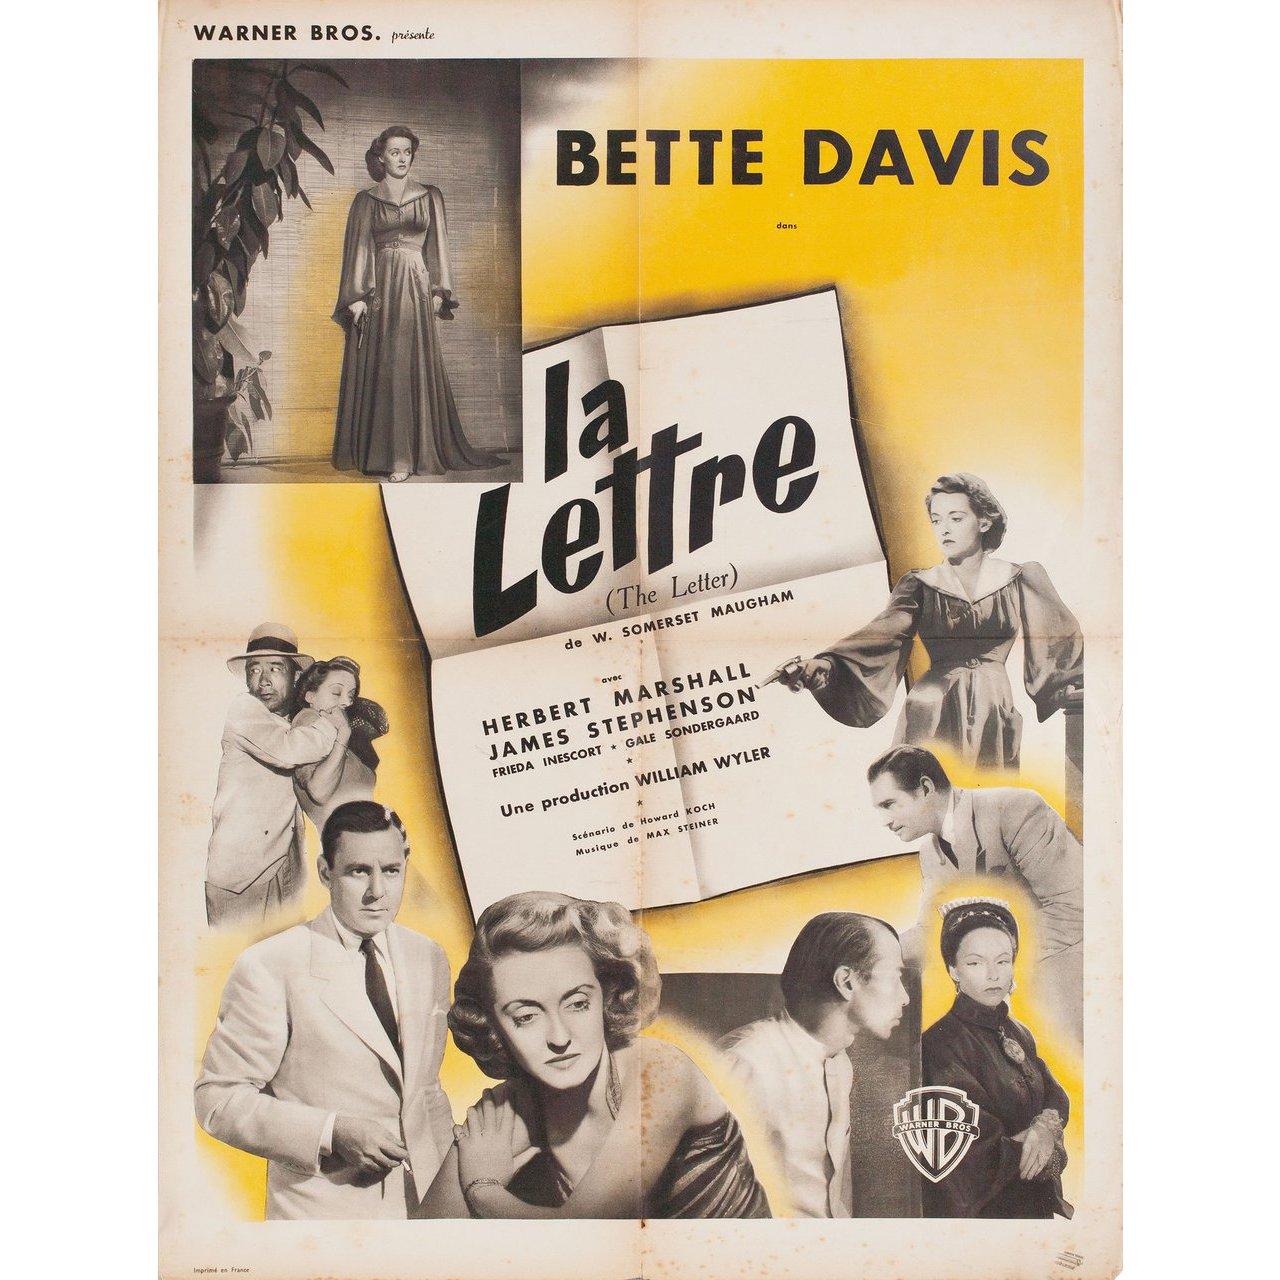 Original 1947 French moyenne poster for the first French theatrical release of the 1940 film The Letter directed by William Wyler with Bette Davis / Herbert Marshall / James Stephenson / Frieda Inescort. Good-Very Good condition, folded with fold